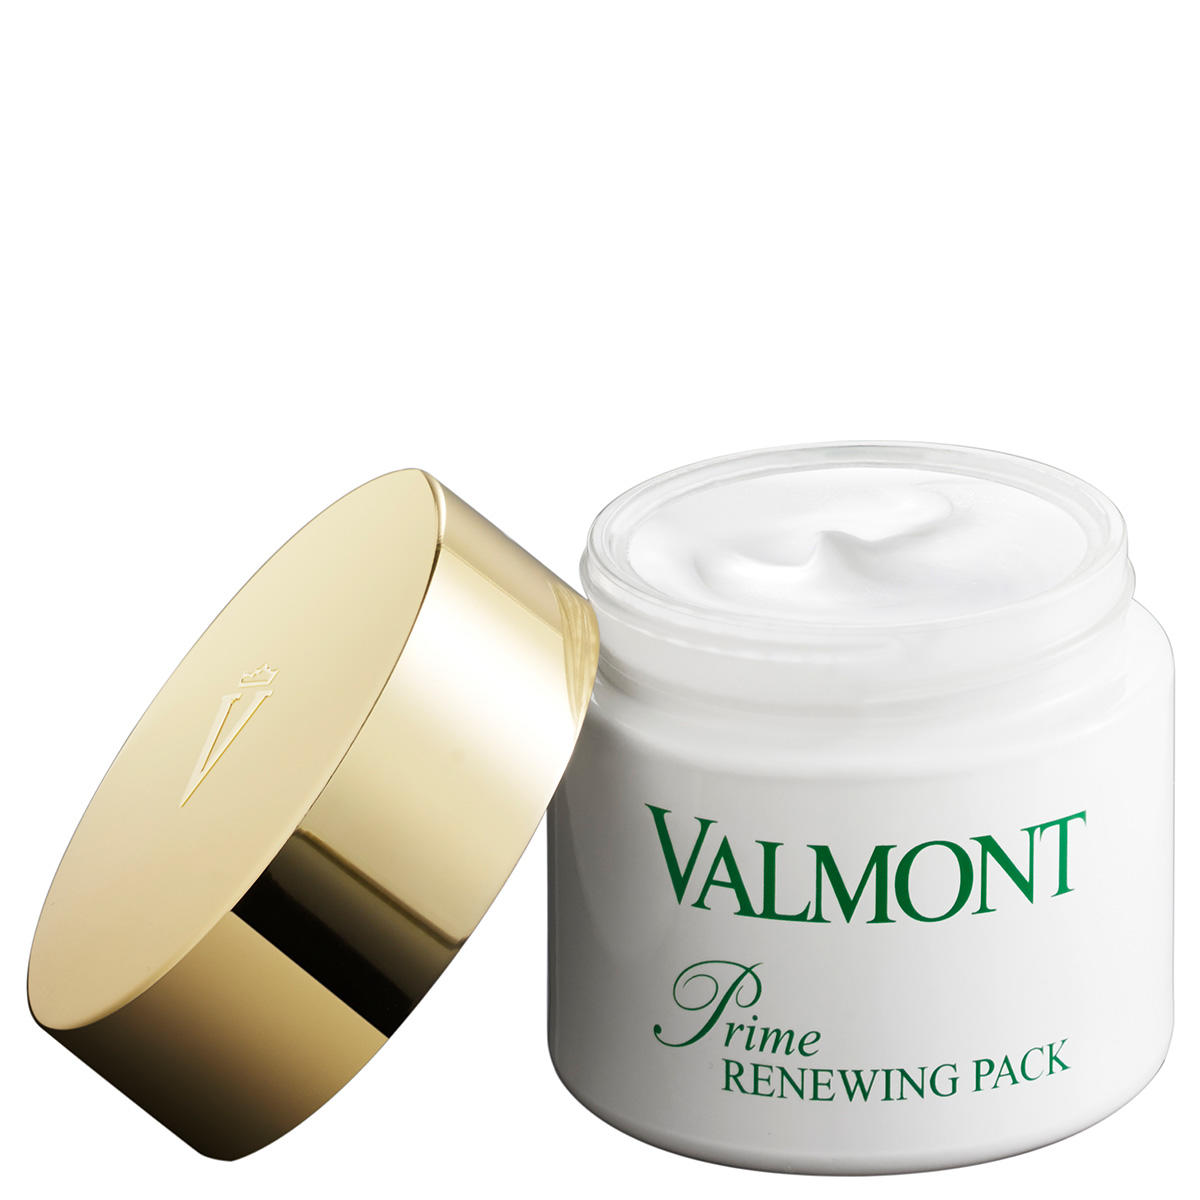 Valmont Prime Renewing Pack 75 ml - 2